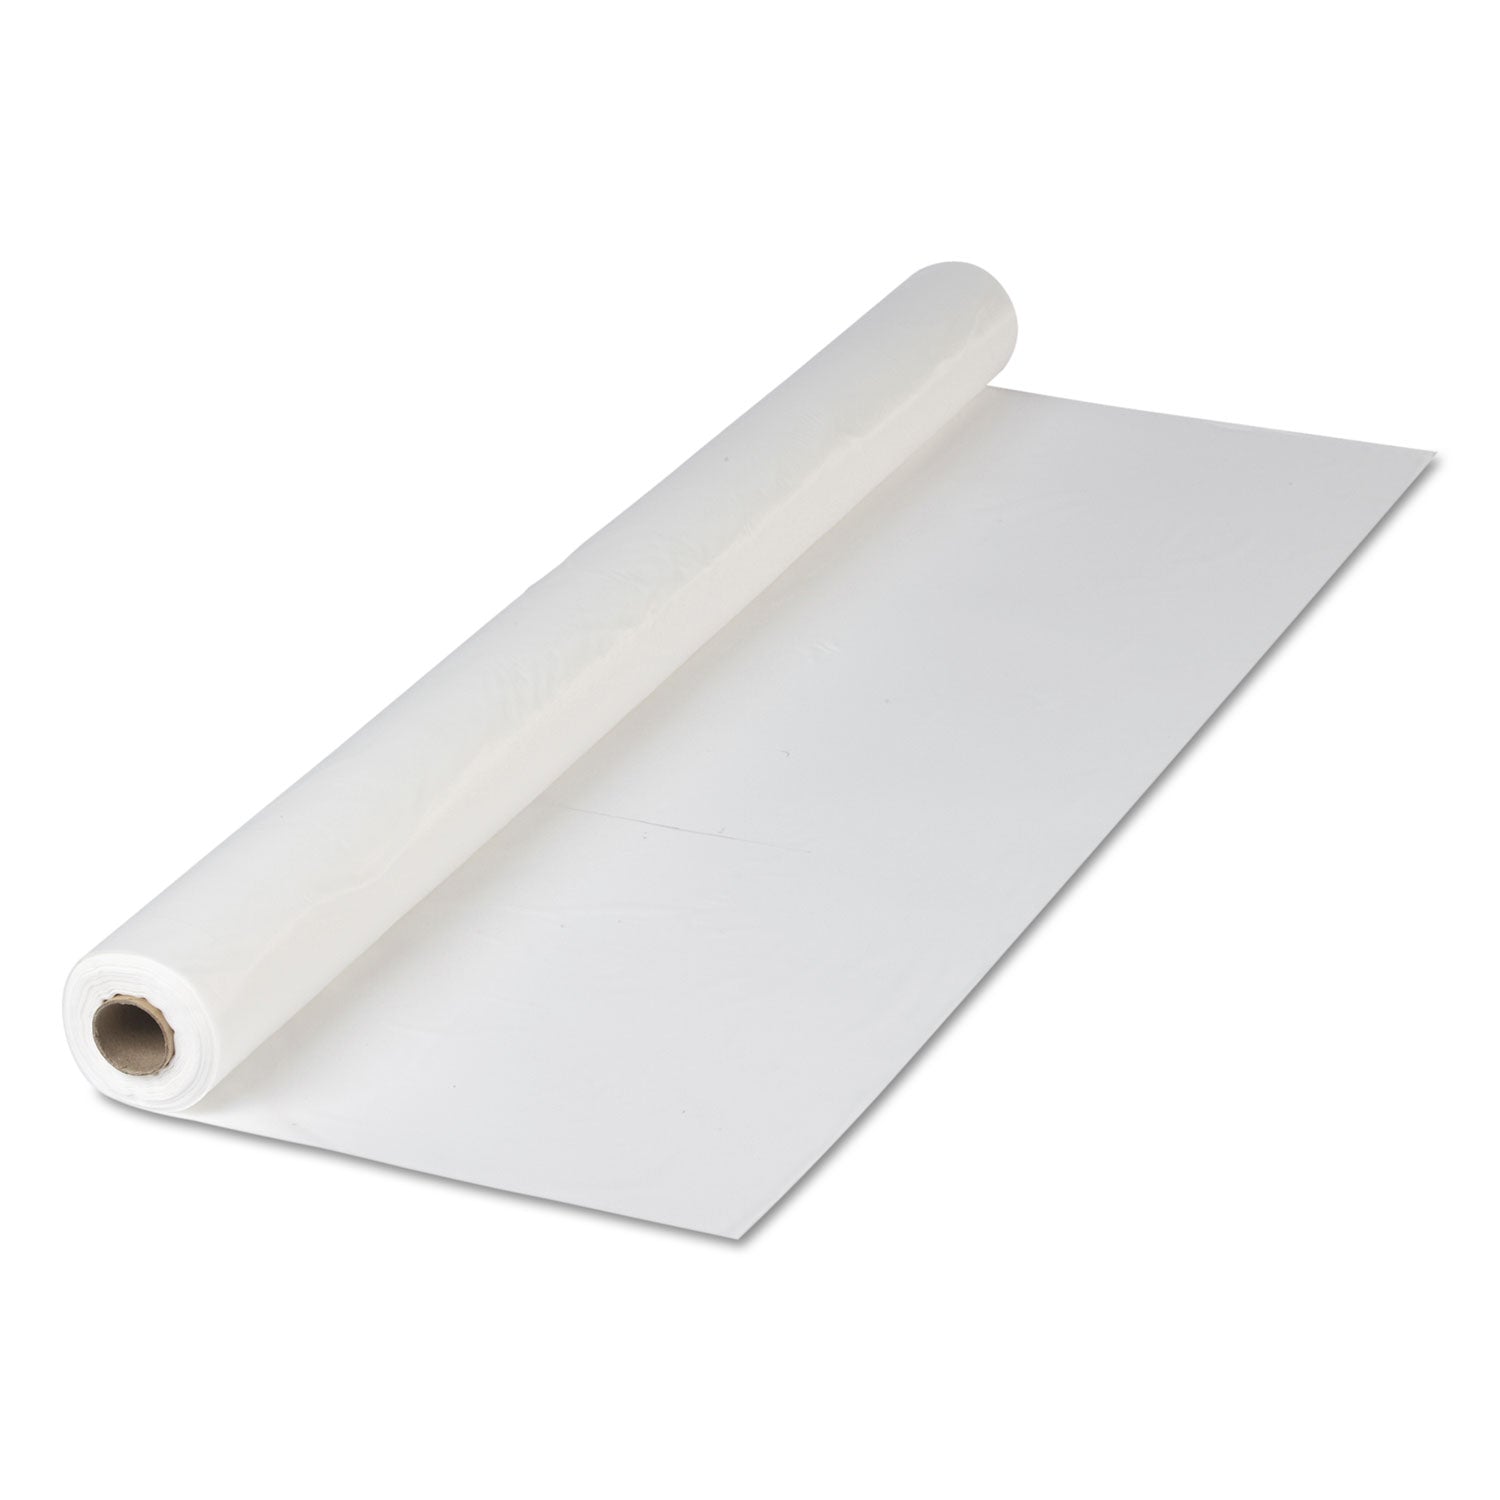 plastic-roll-tablecover-40-x-300-ft-white_hfm114000 - 1